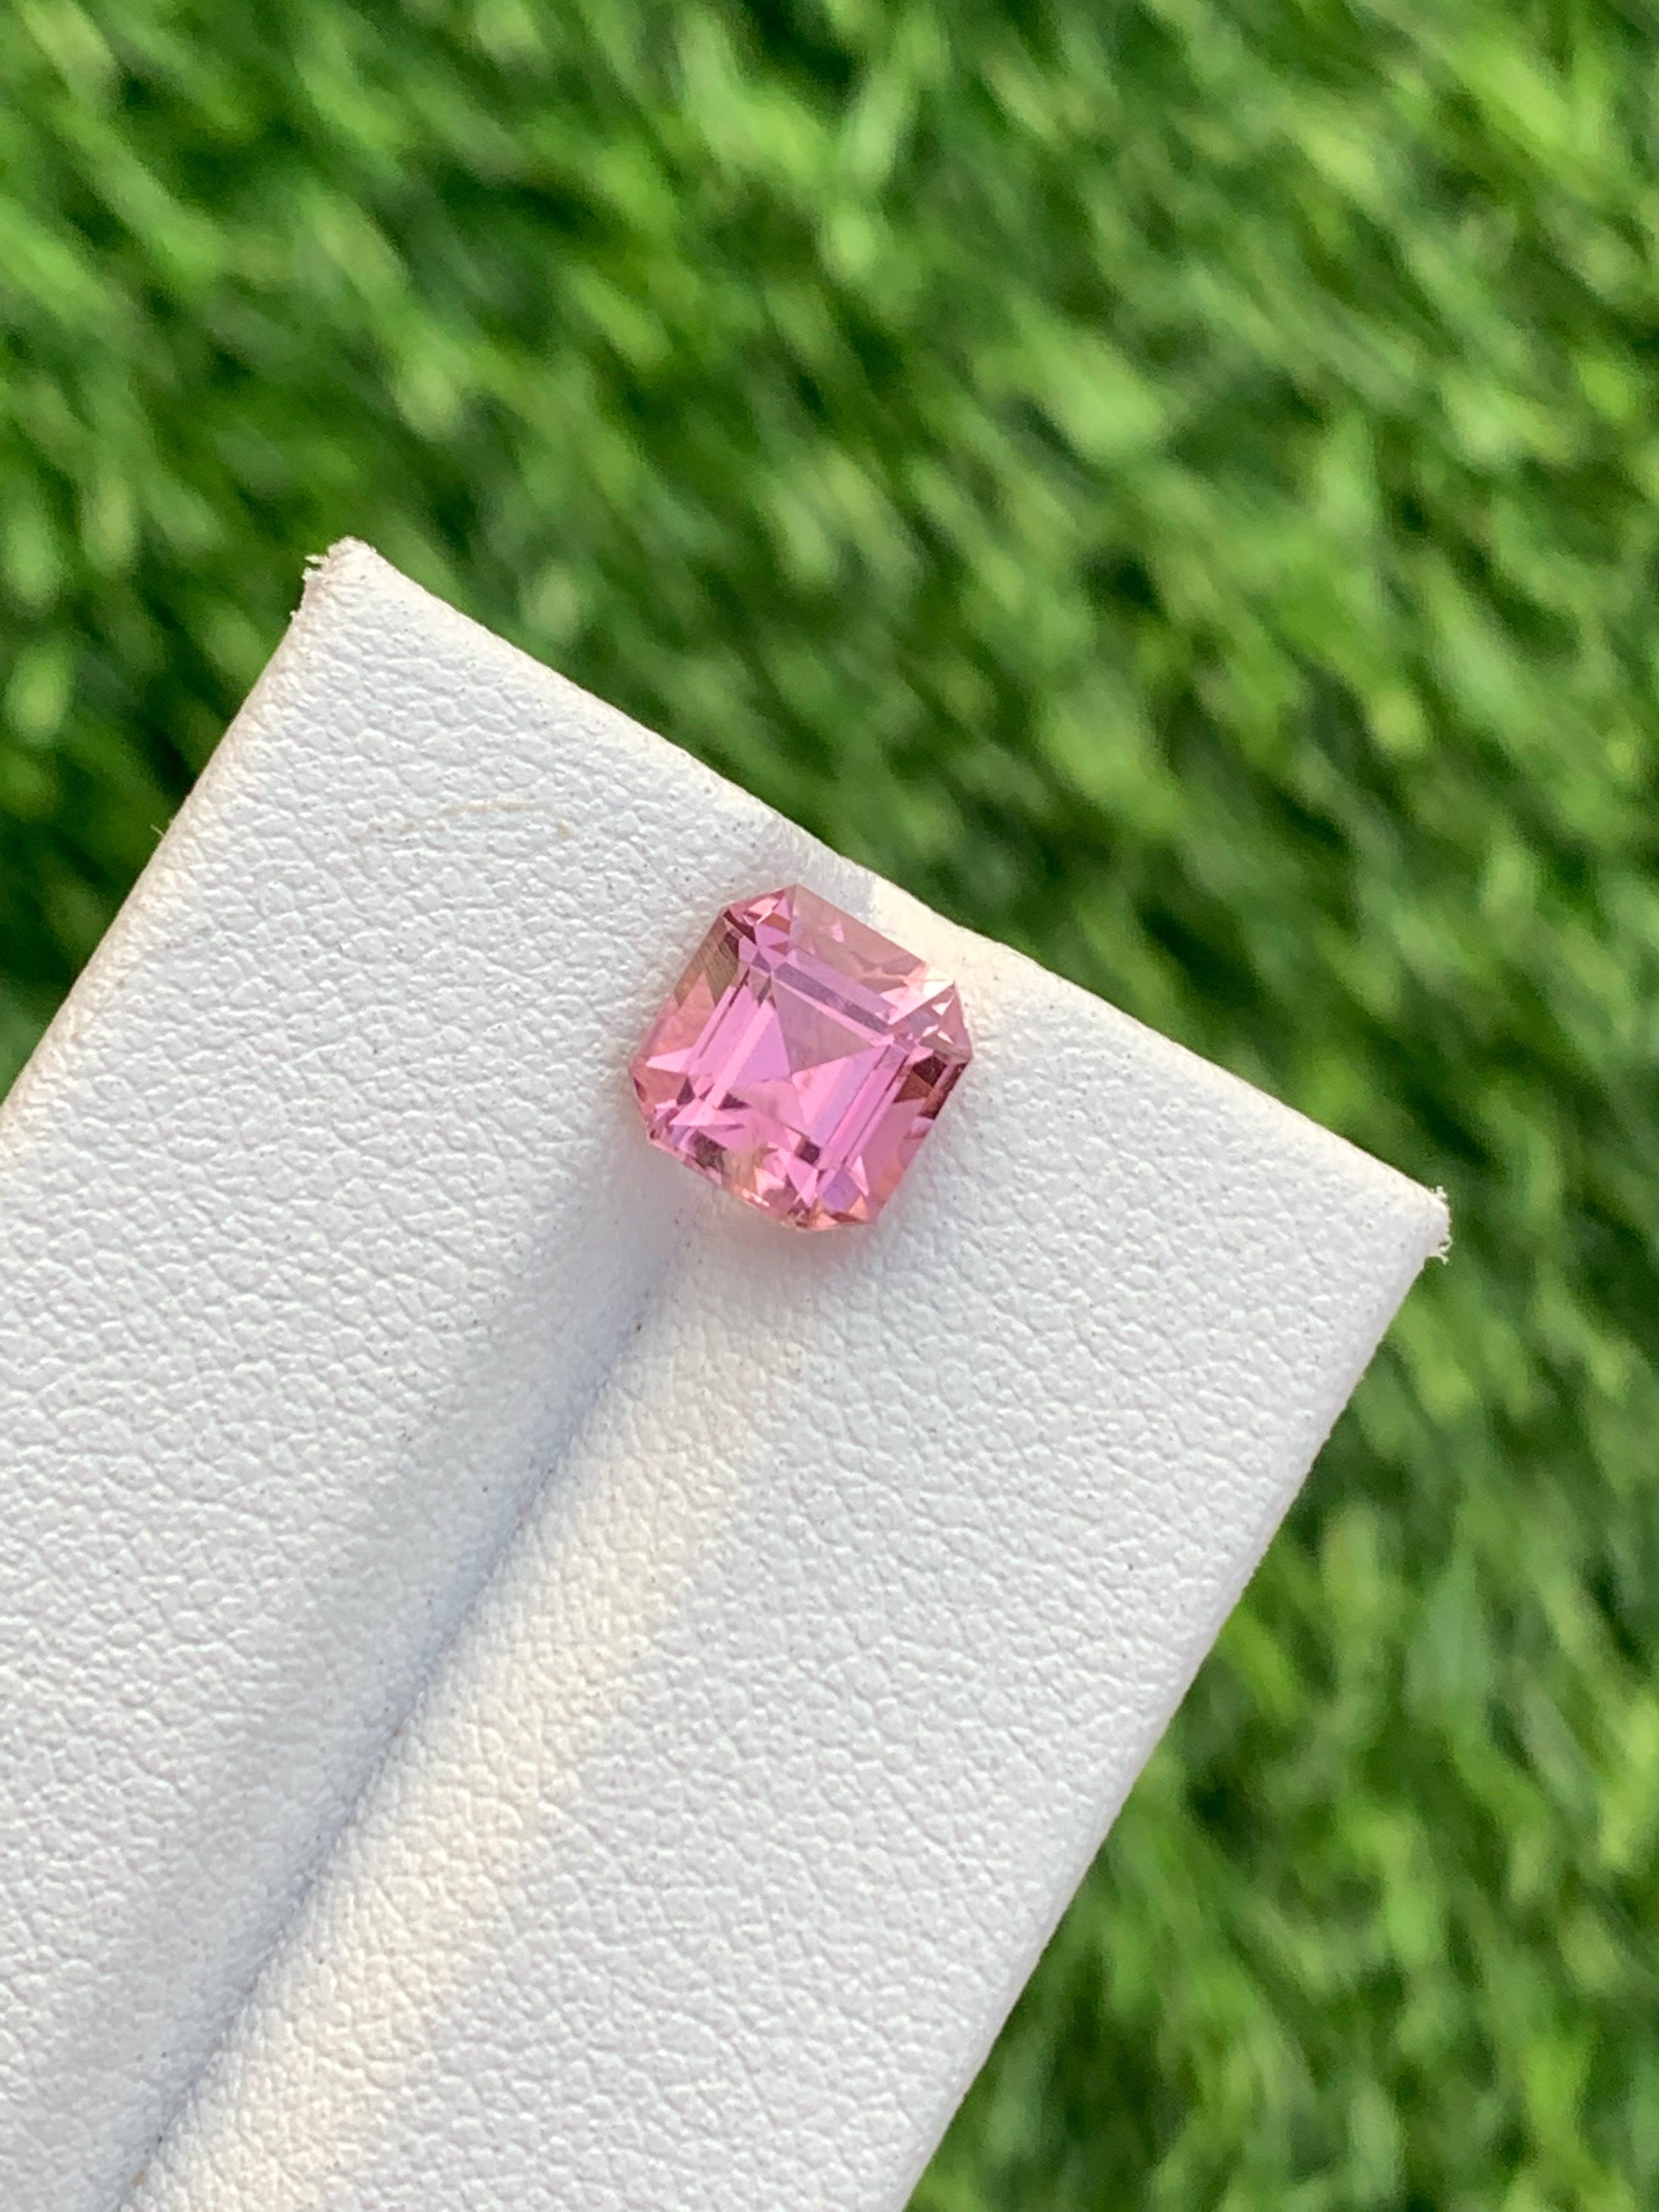 Pretty Soft Pink Tourmaline gemstone of 2.05 carats from Afghanistan has a wonderful cut in a Octagon shape, incredible Pink Color. Great brilliance. This gem is  VVS Clarity.

Product Information
GEMSTONE TYPE:	Natural Hot Pink Tourmaline